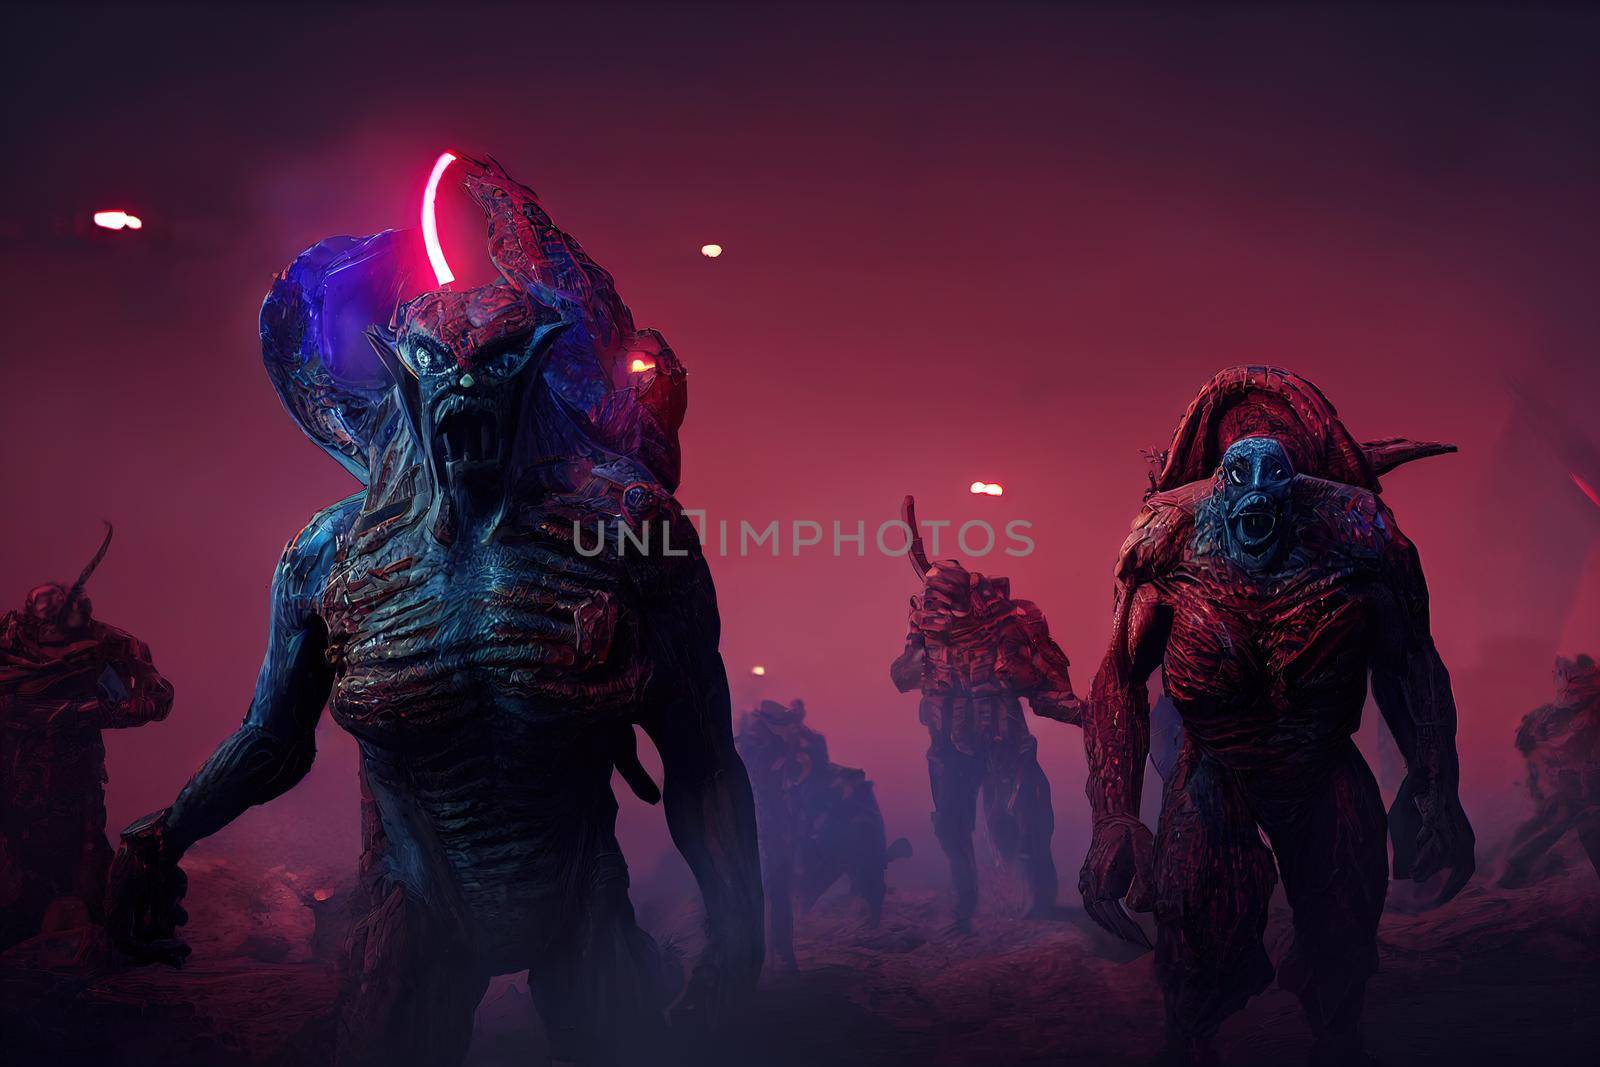 big size scary alien creatures. High quality 3d illustration